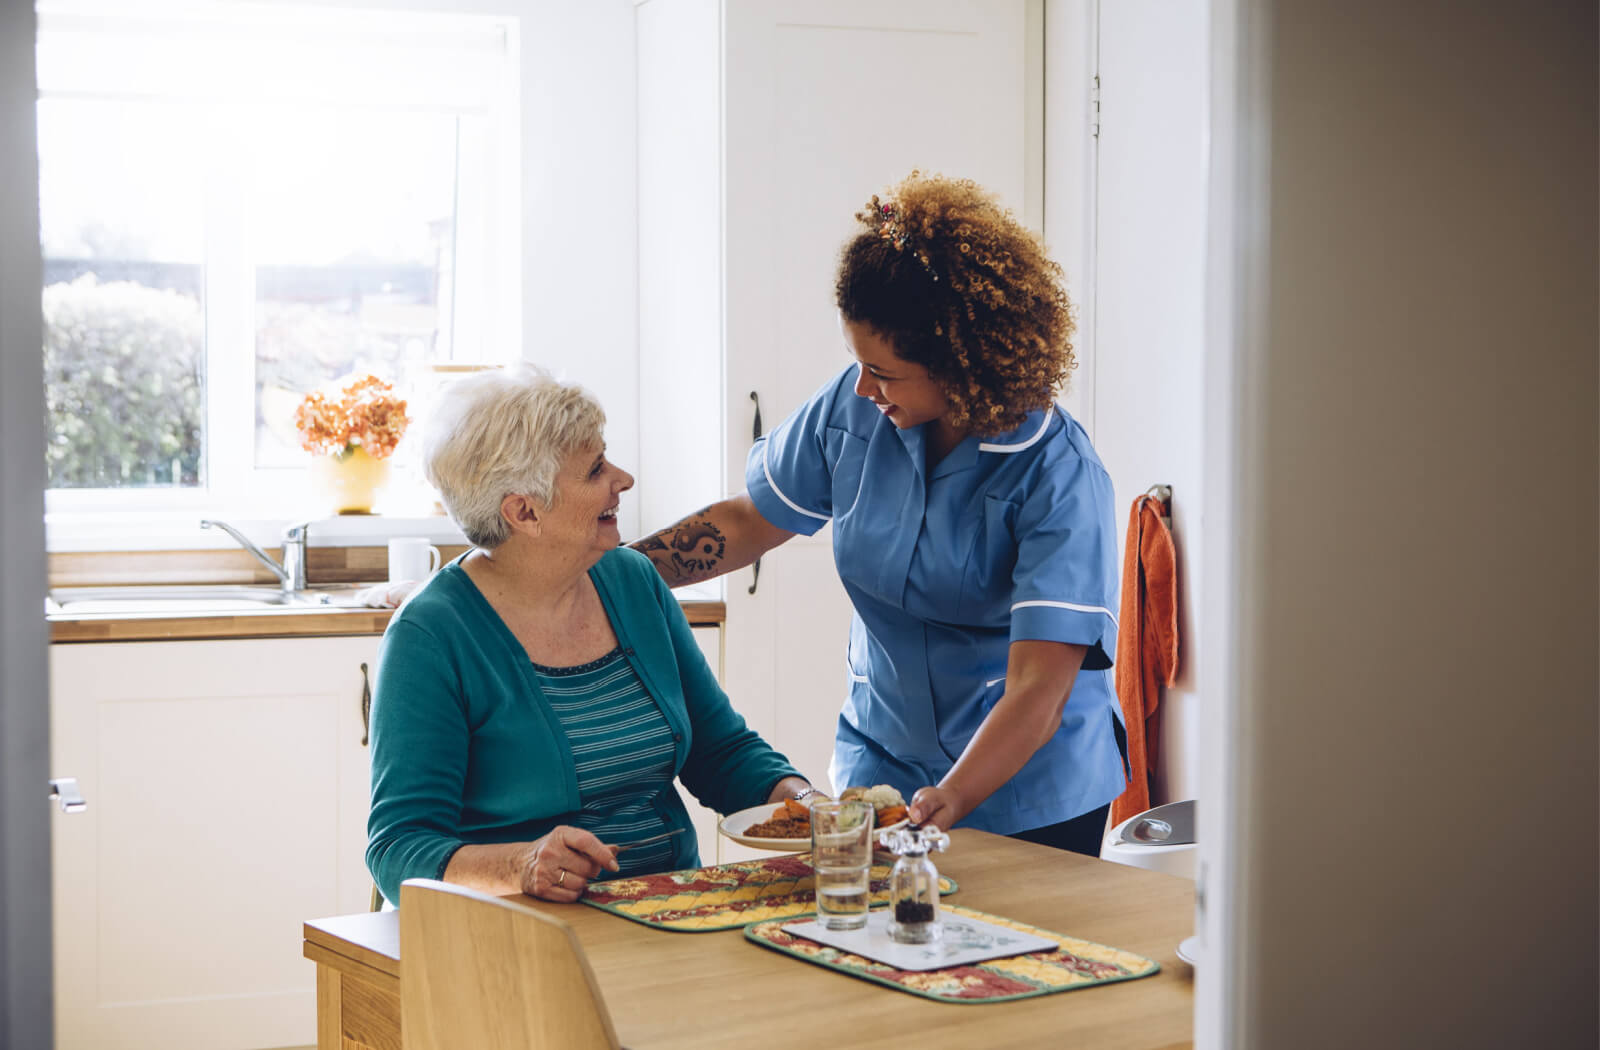 A personal care home staff serving a healthy meal to a resident.